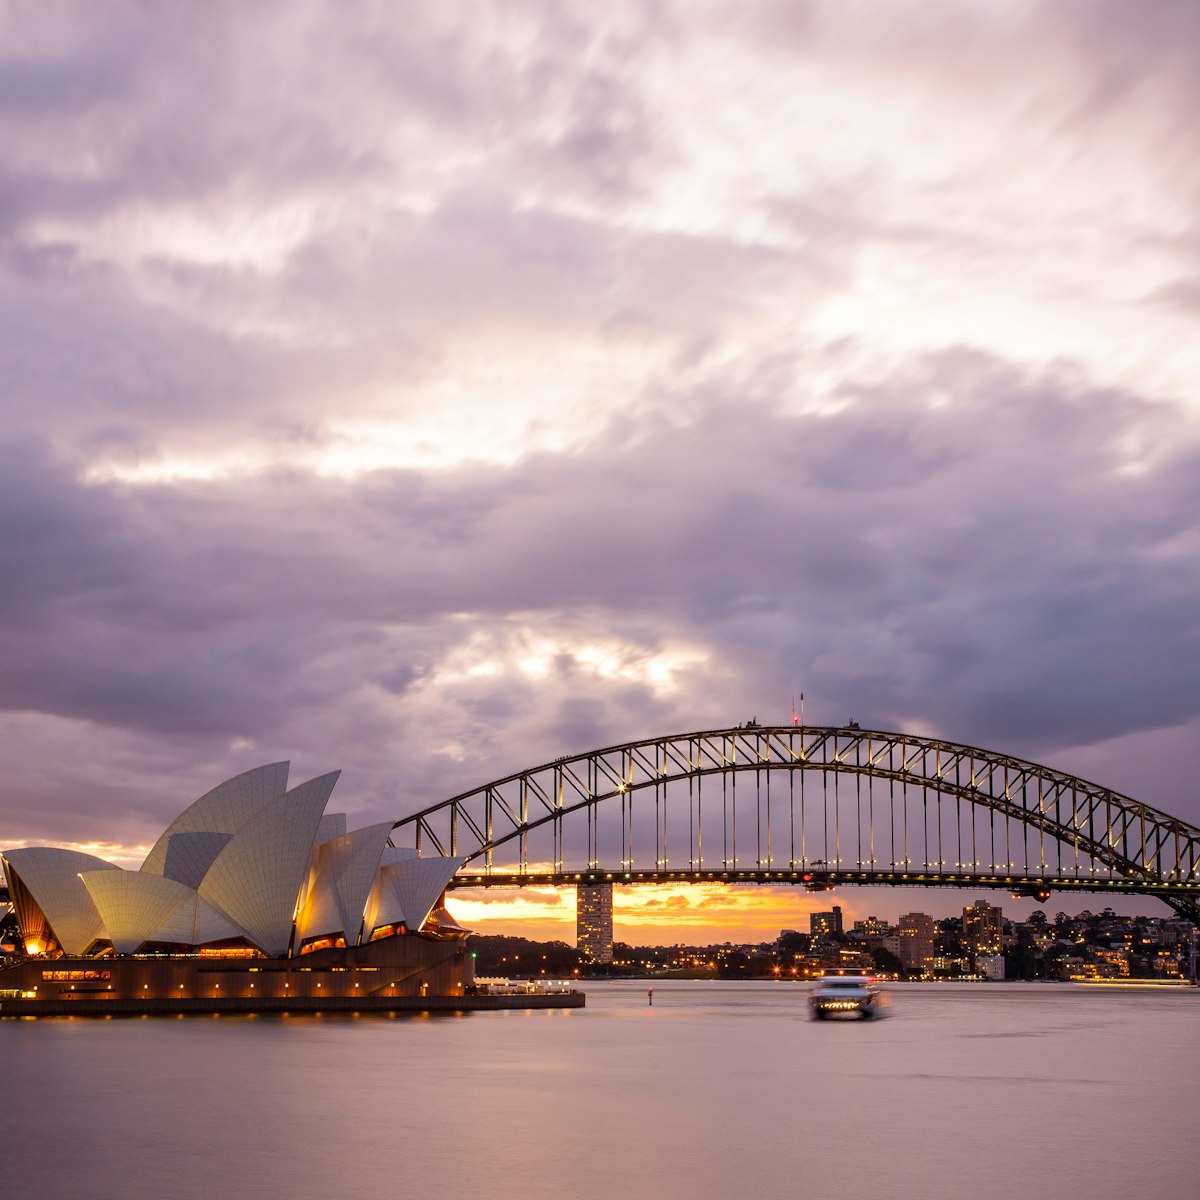 Sydney, Australia - July 11, 2010 : Dramatic sky and the Sydney Opera House at dusk. Sydney skyline taken from Mrs. Macquarie's Point.; Shutterstock ID 185348105; Your name (First / Last): Josh Vogel; Project no. or GL code: 56530; Network activity no. or Cost Centre: Online-Design; Product or Project: 65050/7529/Josh Vogel/LP.com Destination Galleries